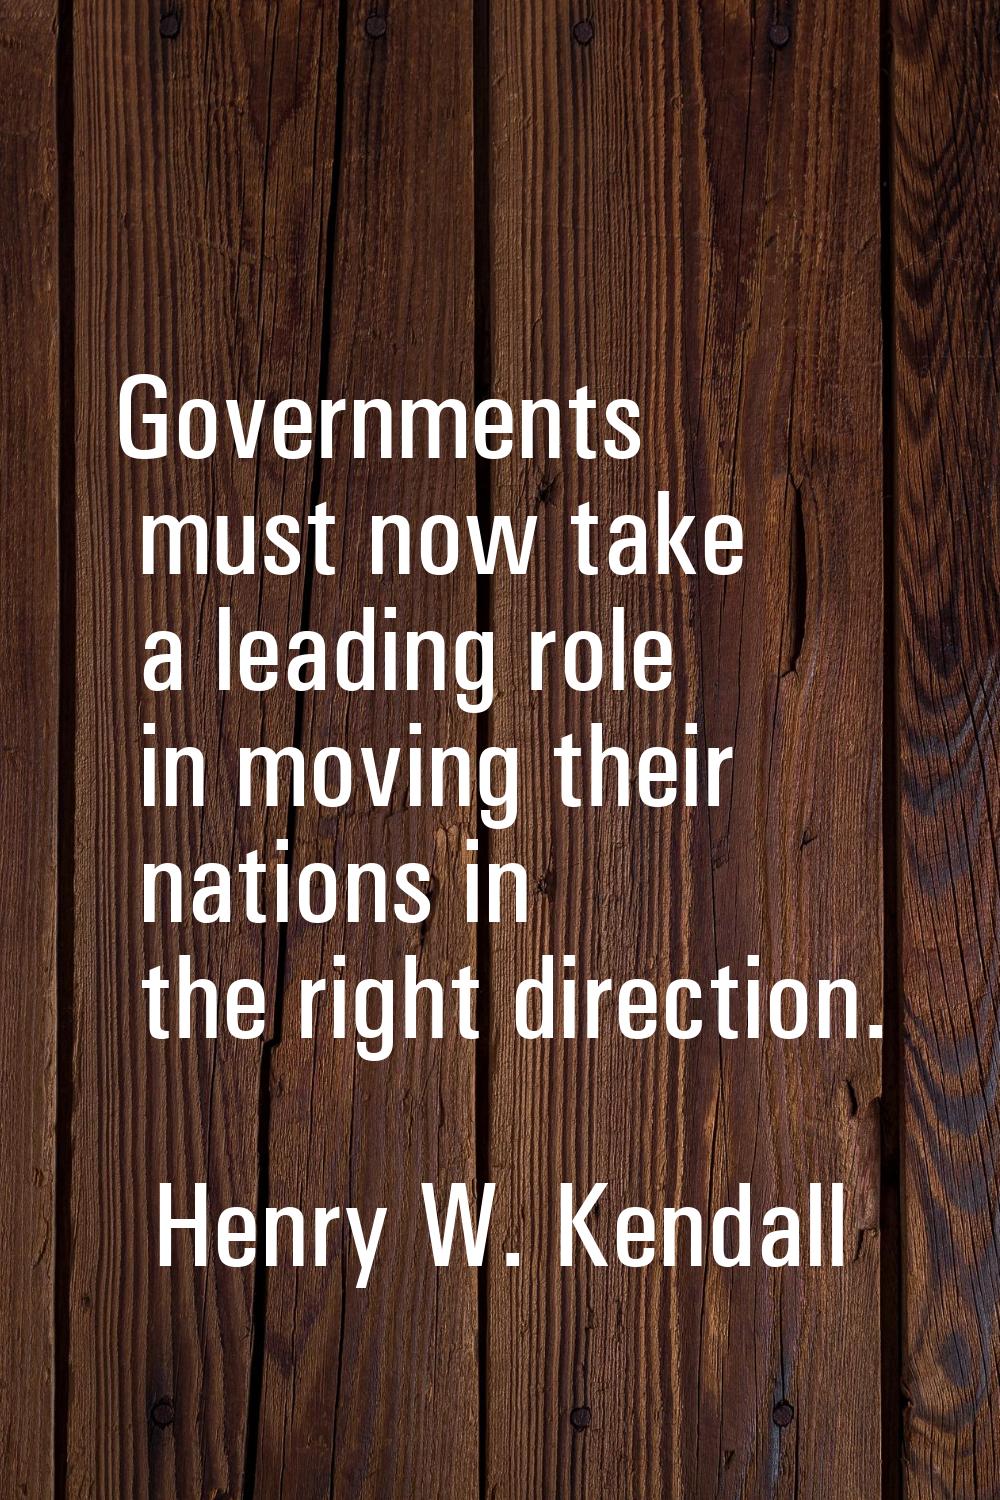 Governments must now take a leading role in moving their nations in the right direction.